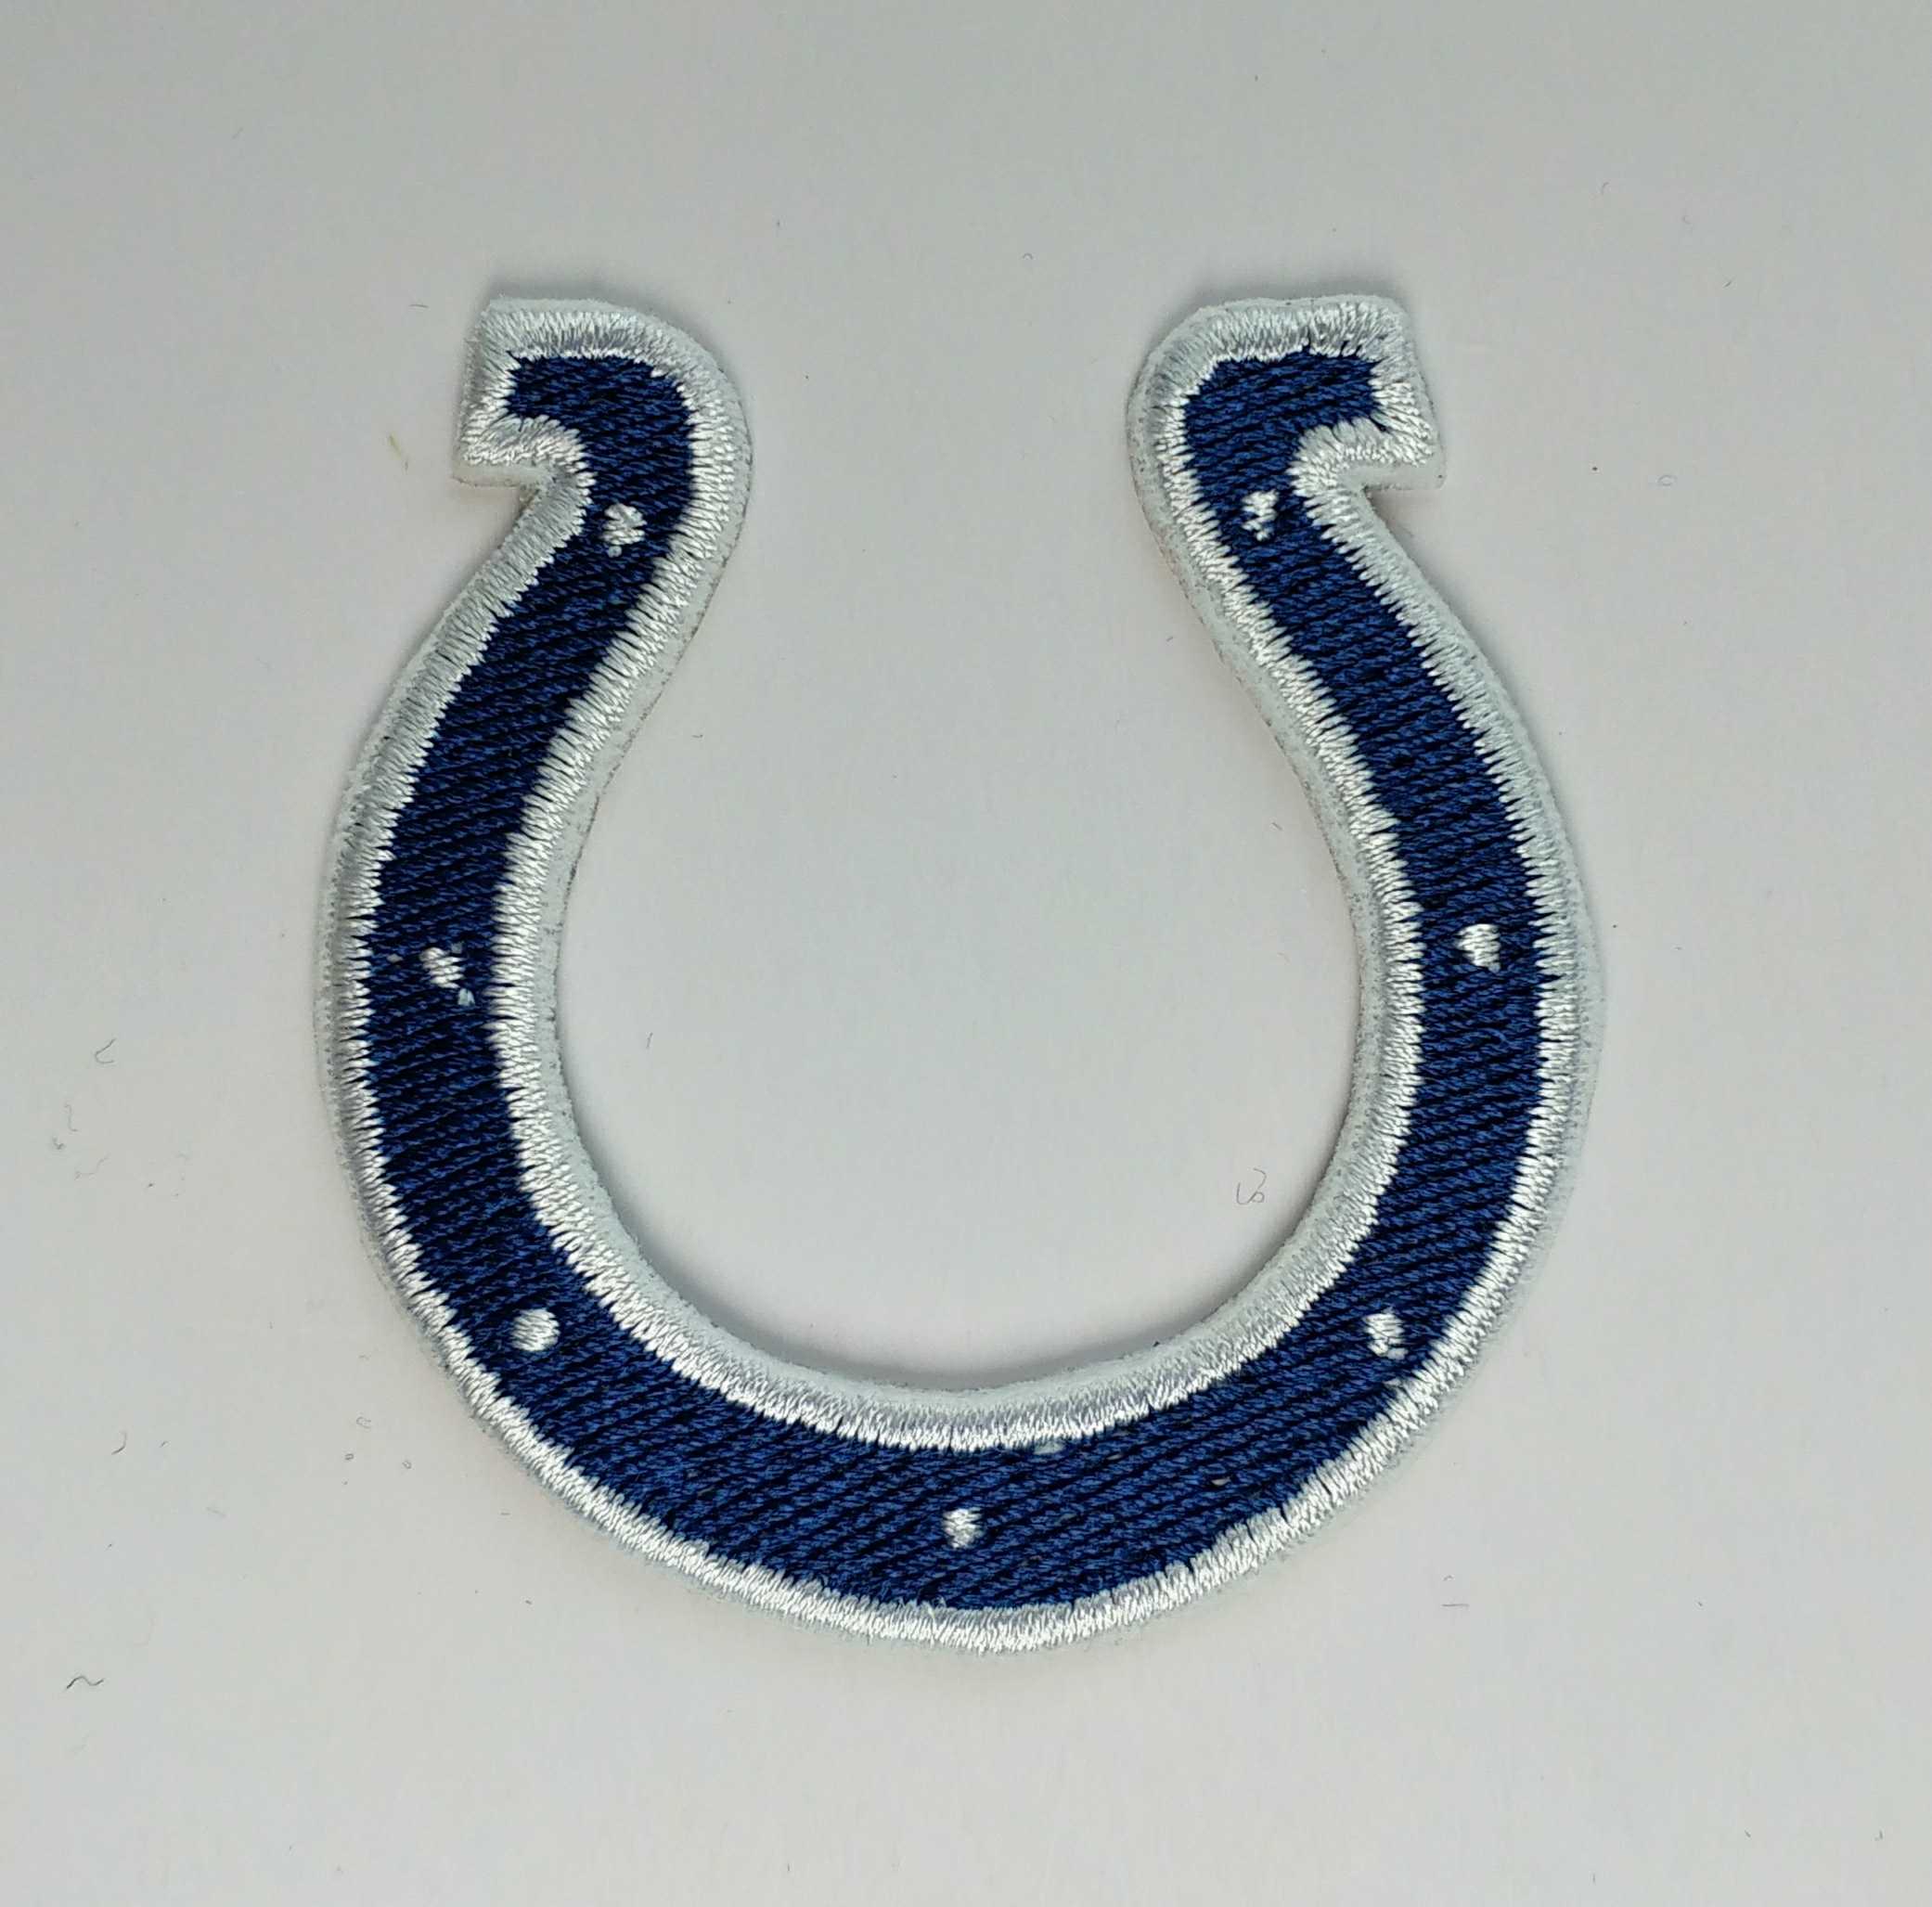 NFL INDIANAPOLIS COLTS INDIANAPOLISCOLTS ڼ ġ ġ( ޸ ΰ )-